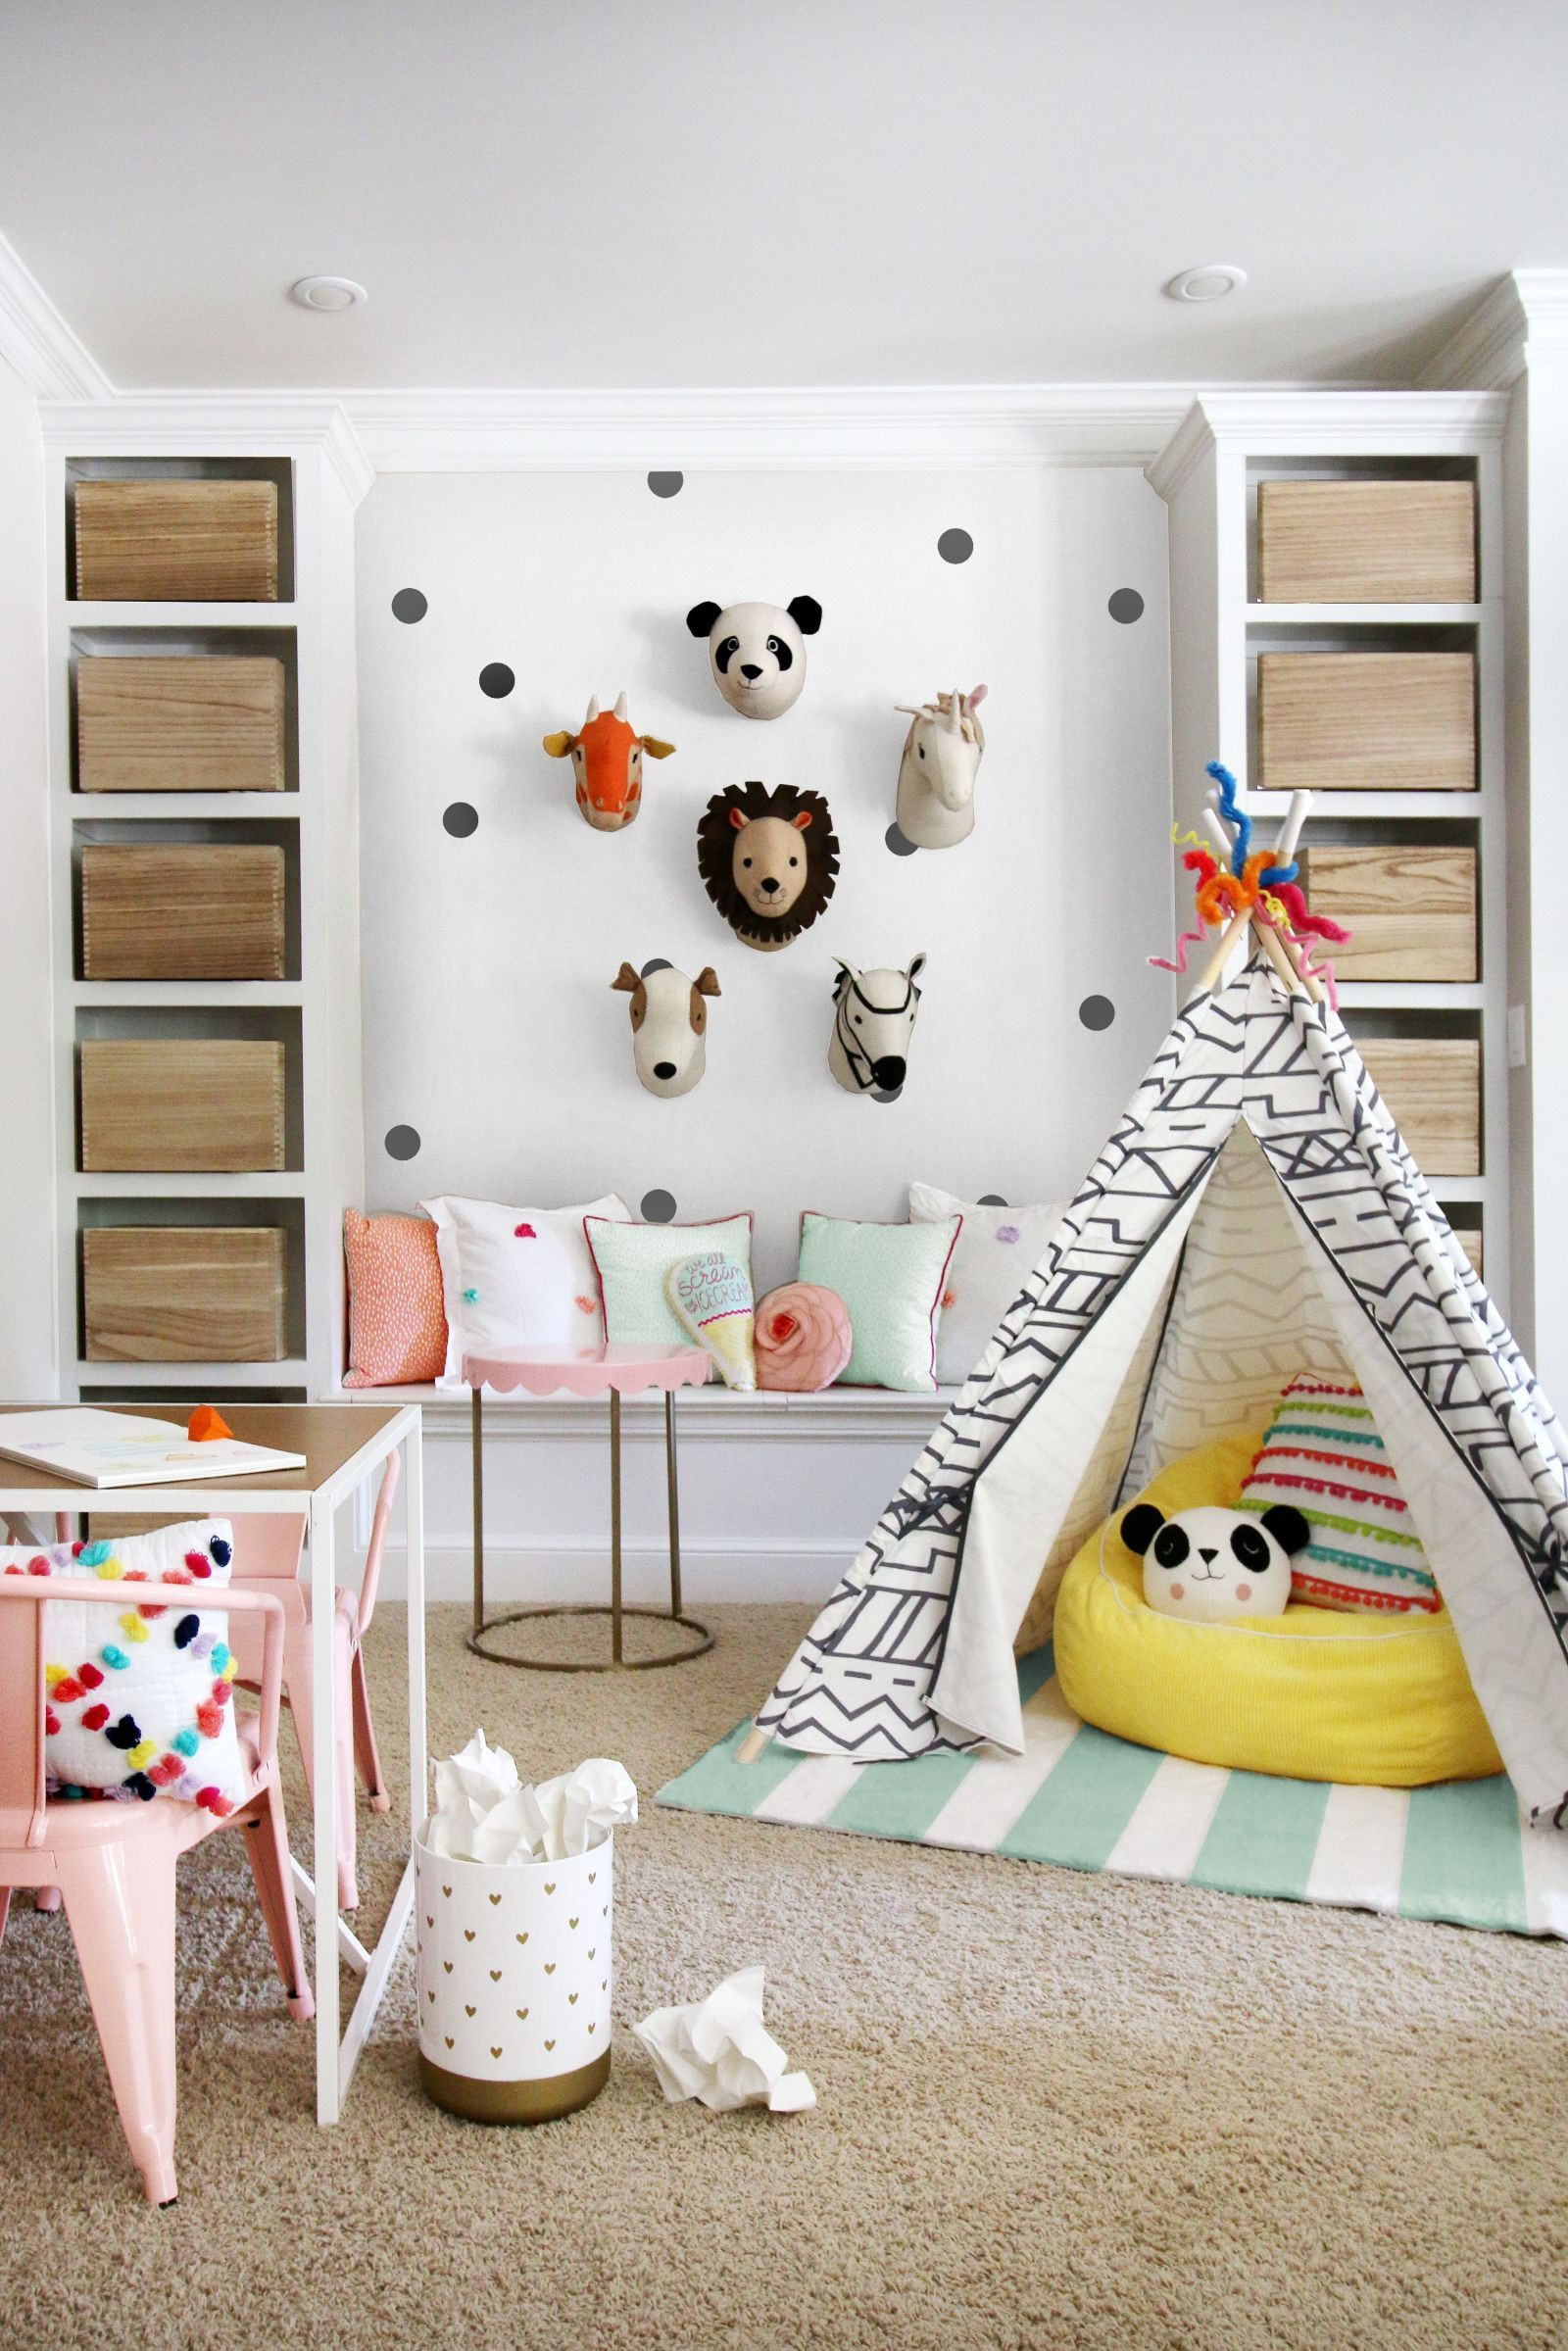 Kids Playroom Design
 6 Totally Fresh Decorating Ideas for the Kids Playroom